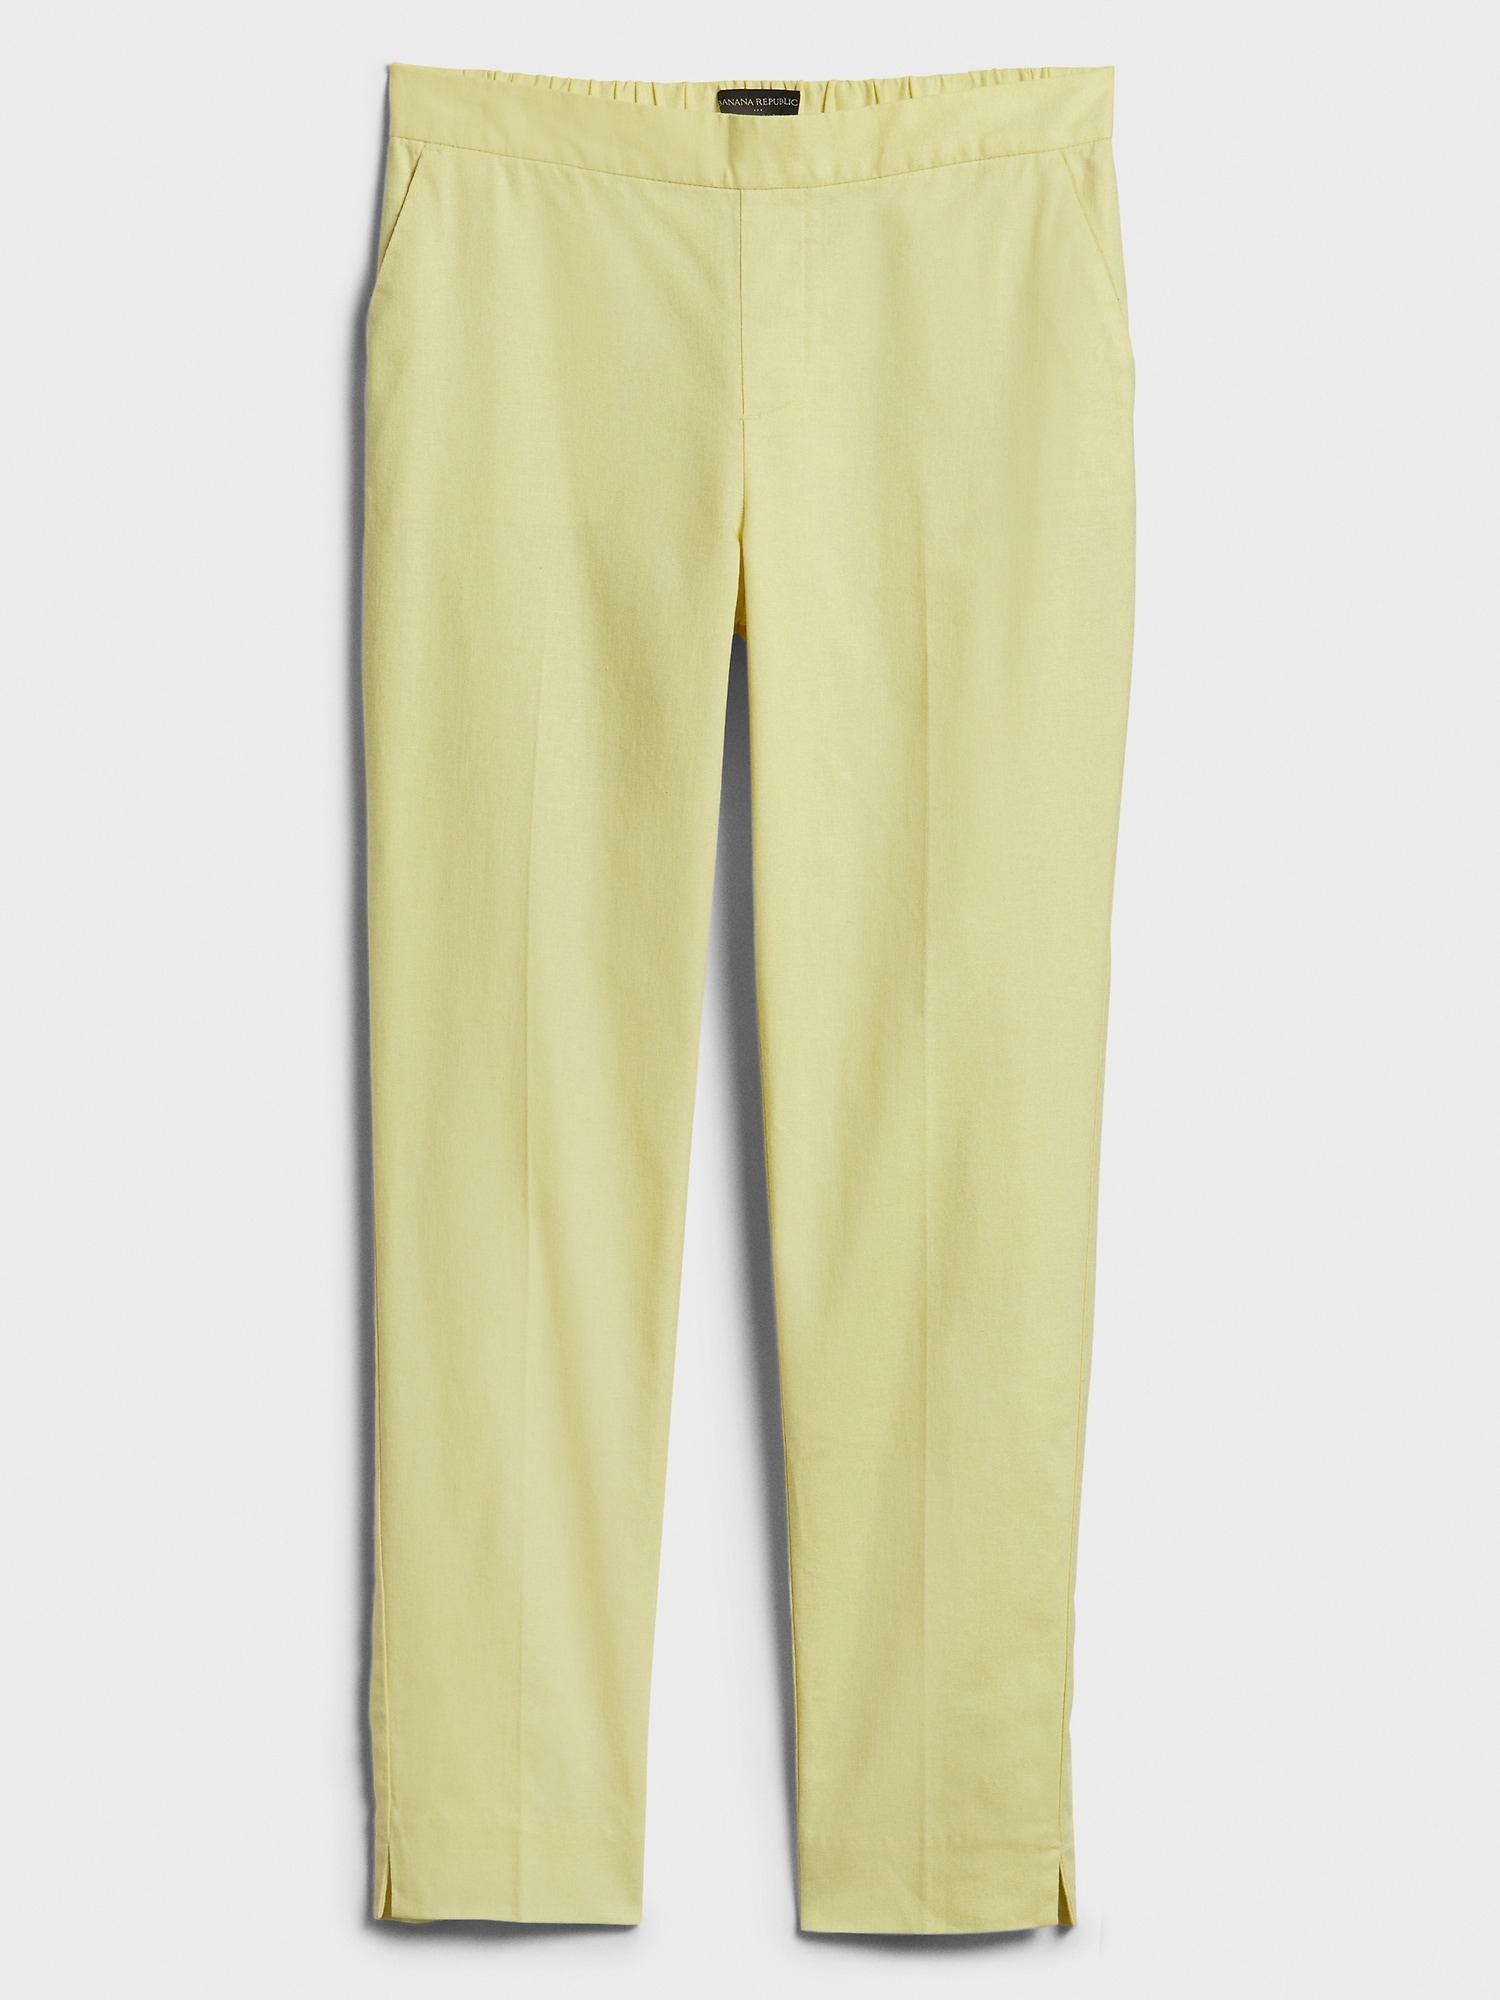 Hayden Stretch Linen Pull-On Ankle Pant